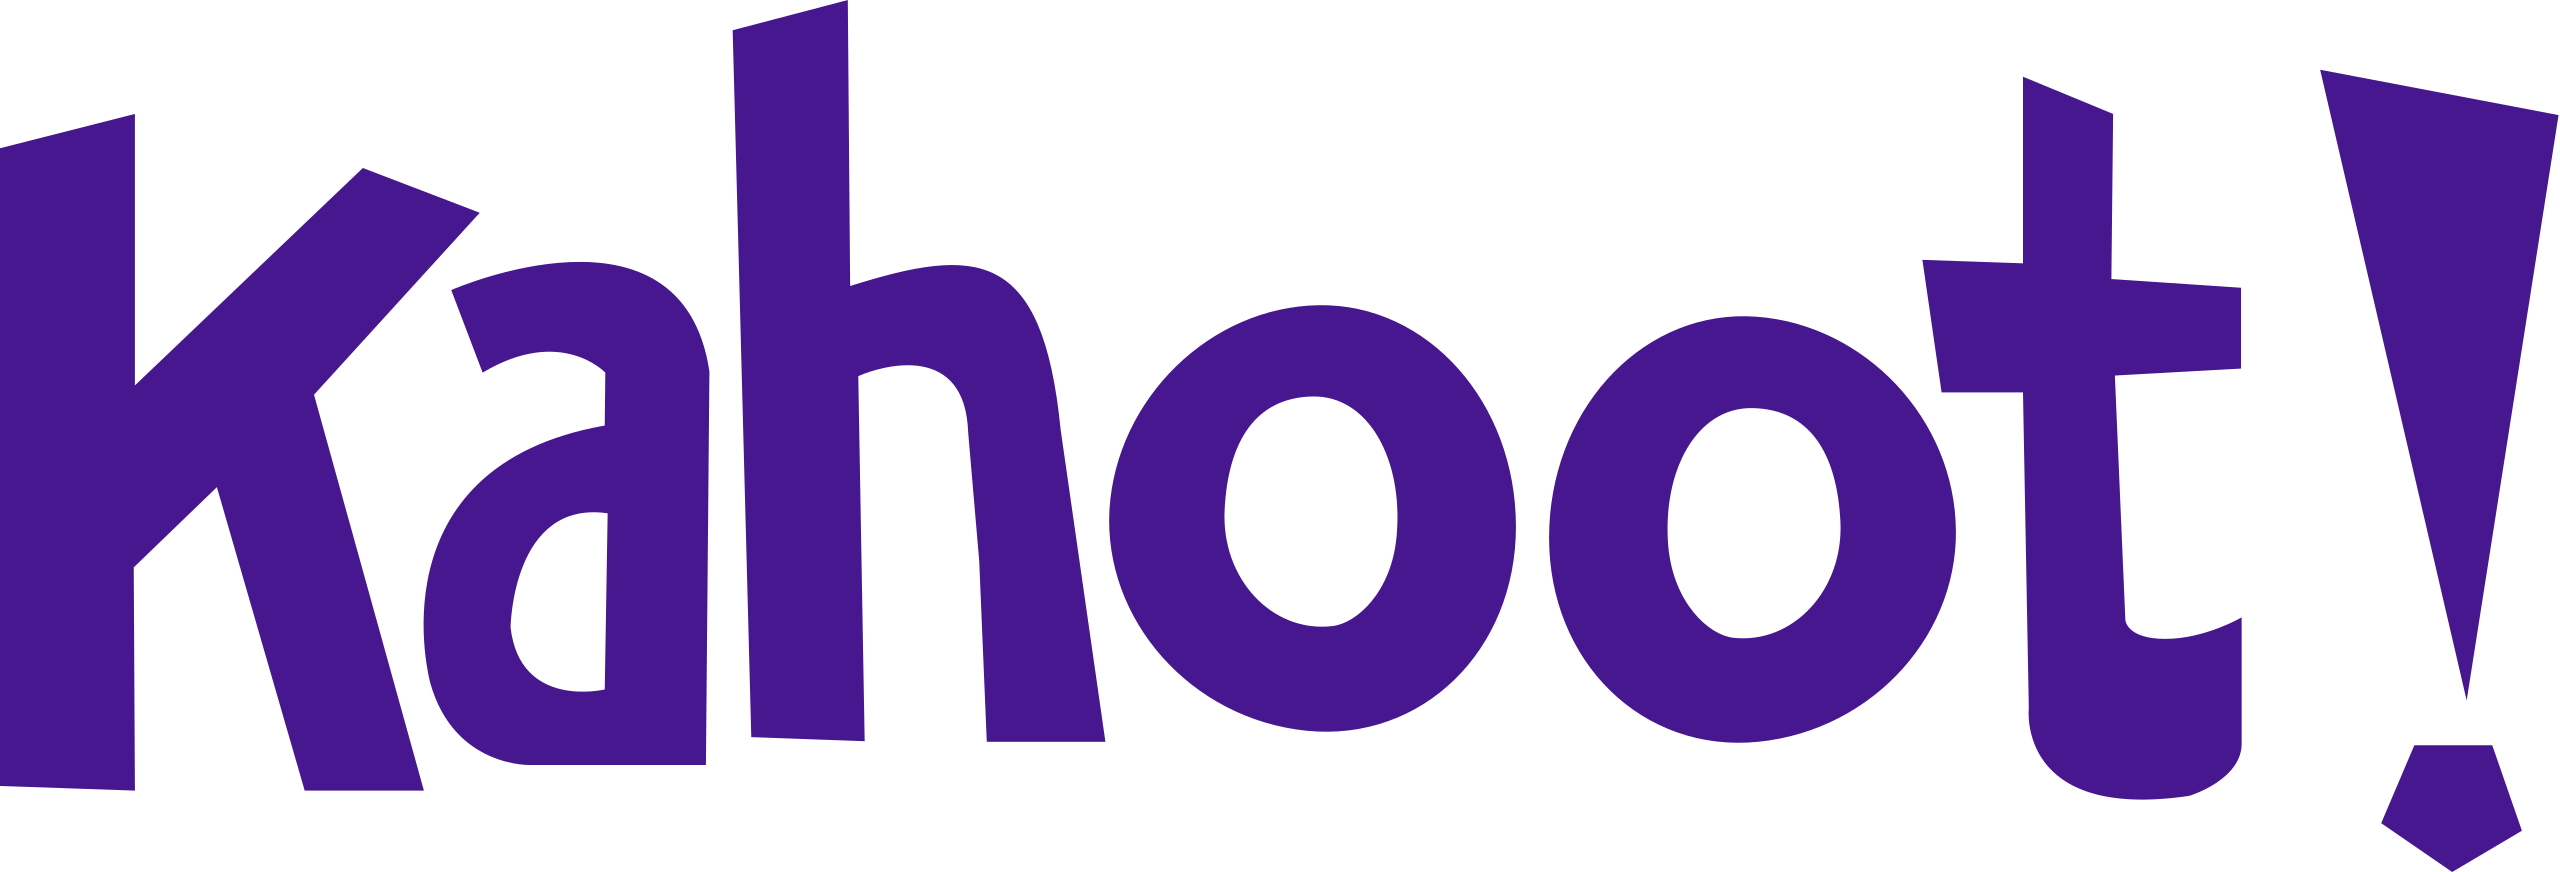 what is kahoot